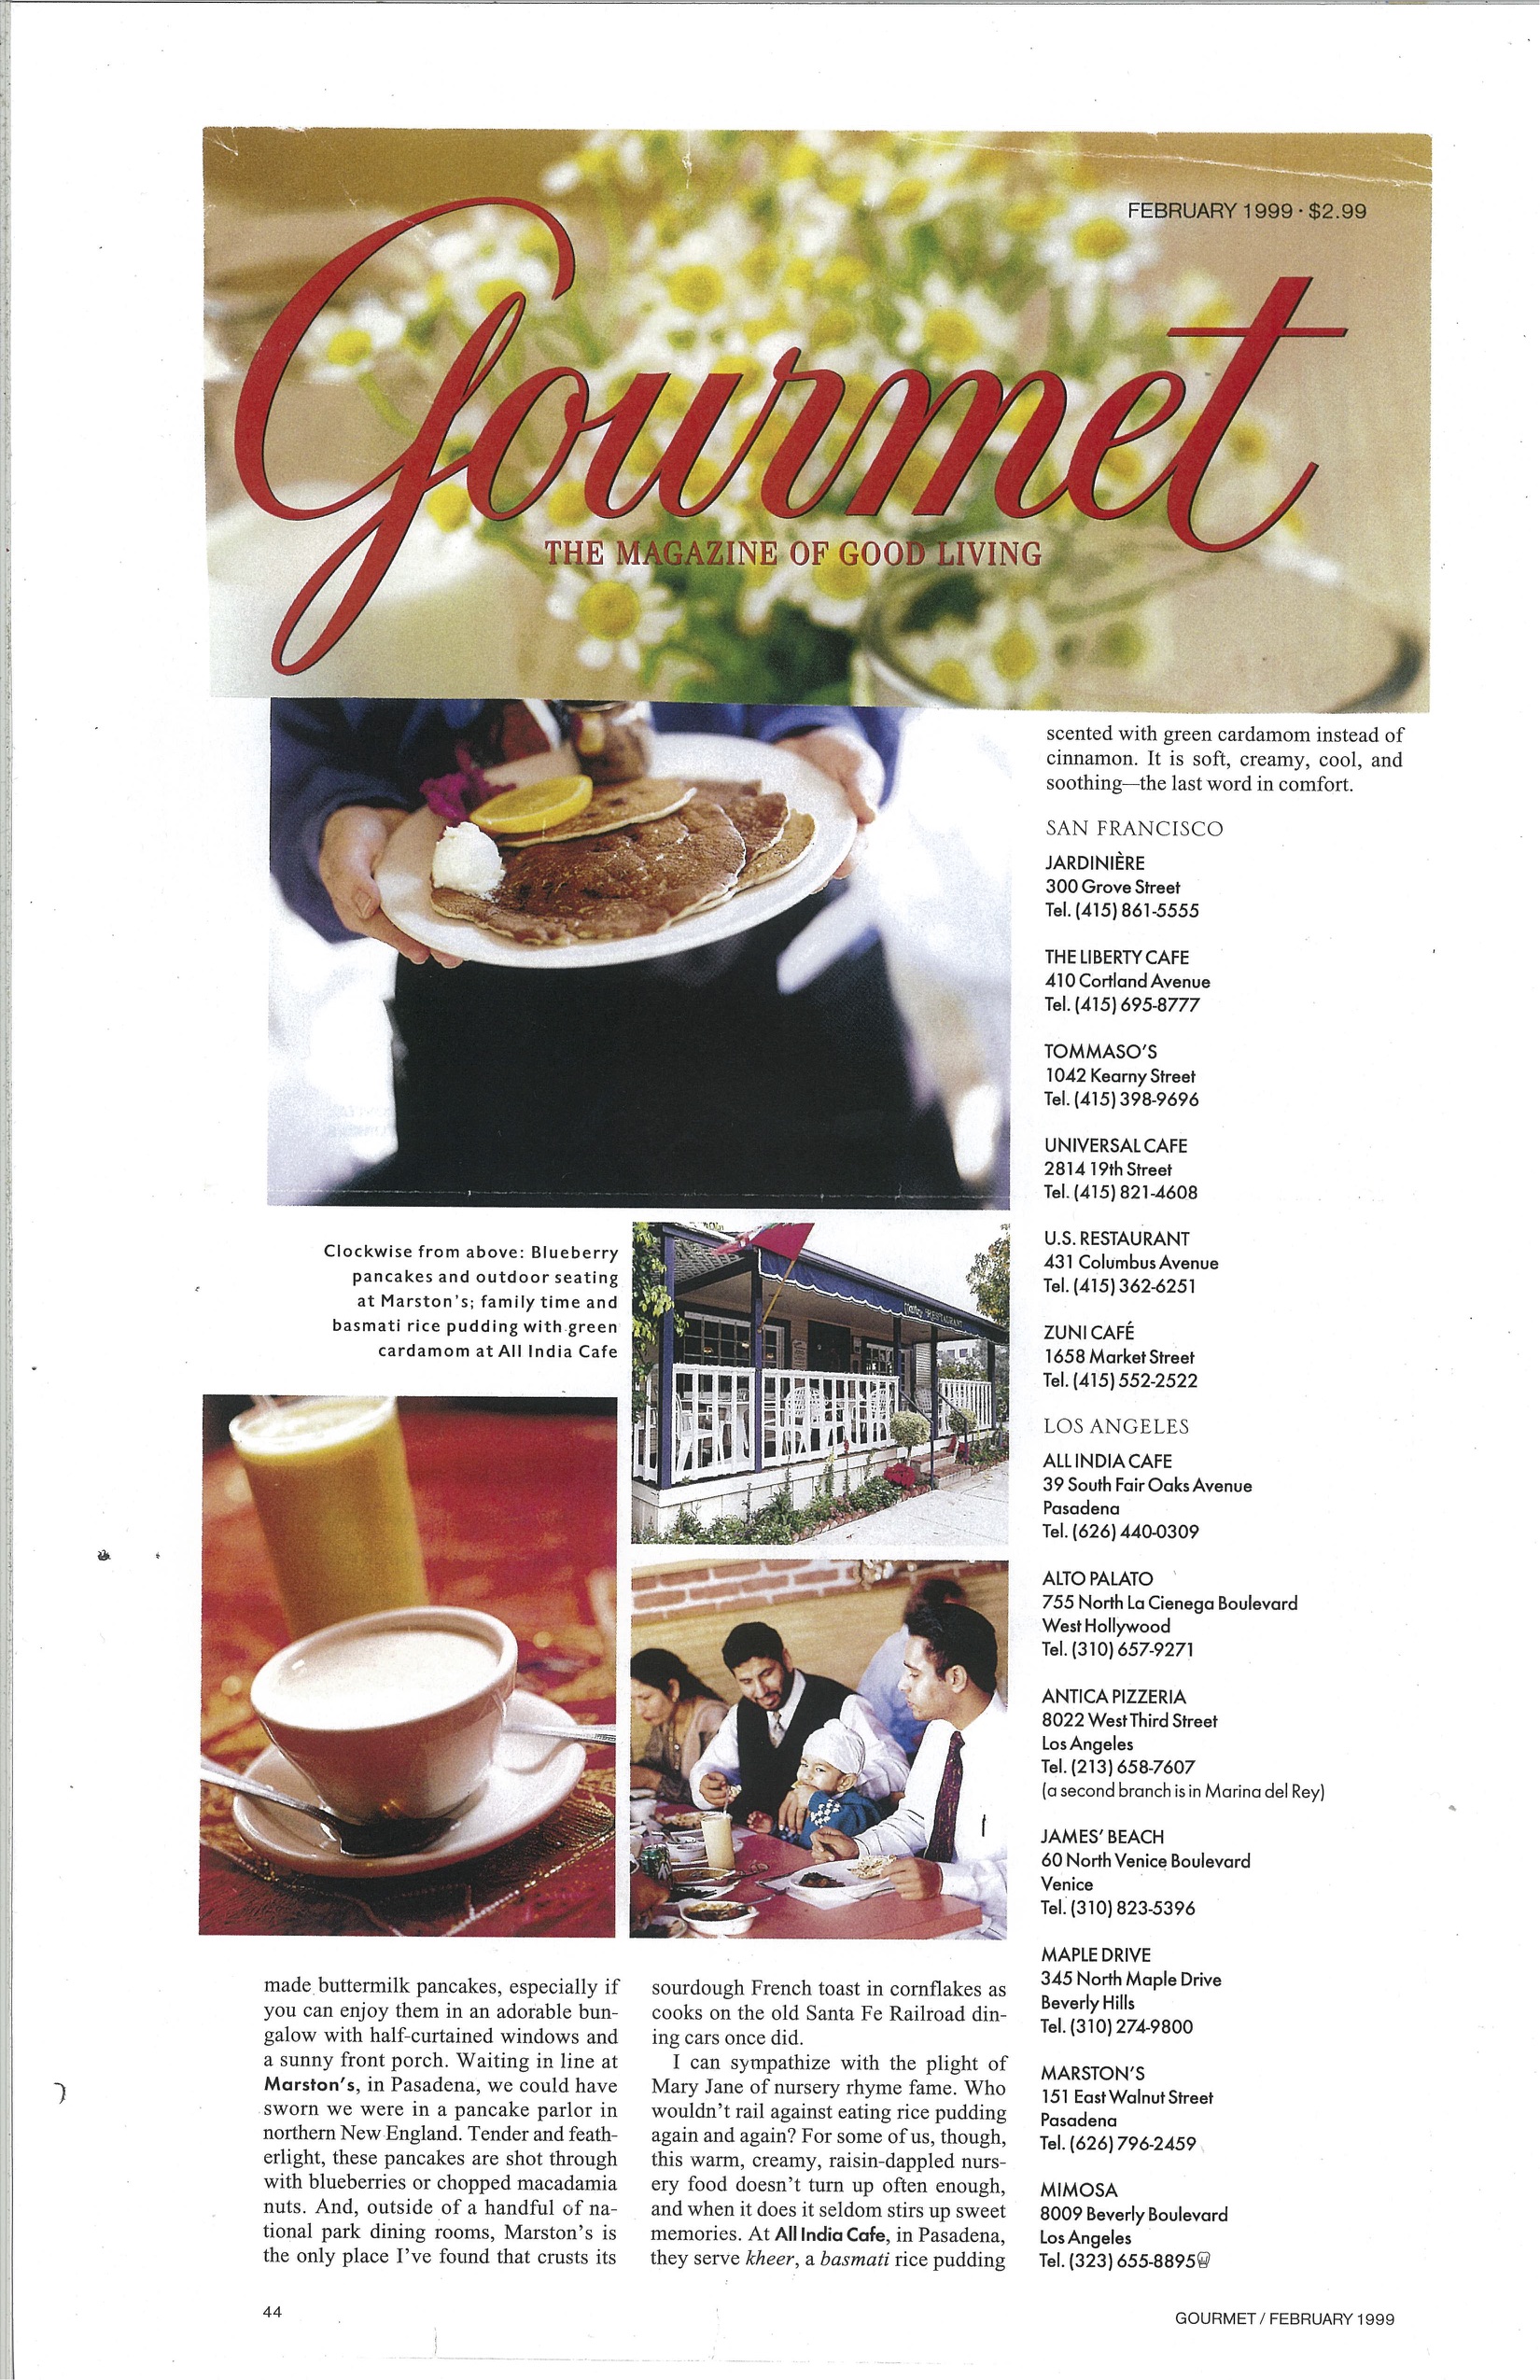  A press clipping of All India Cafe featured in Gourmet magazine. 